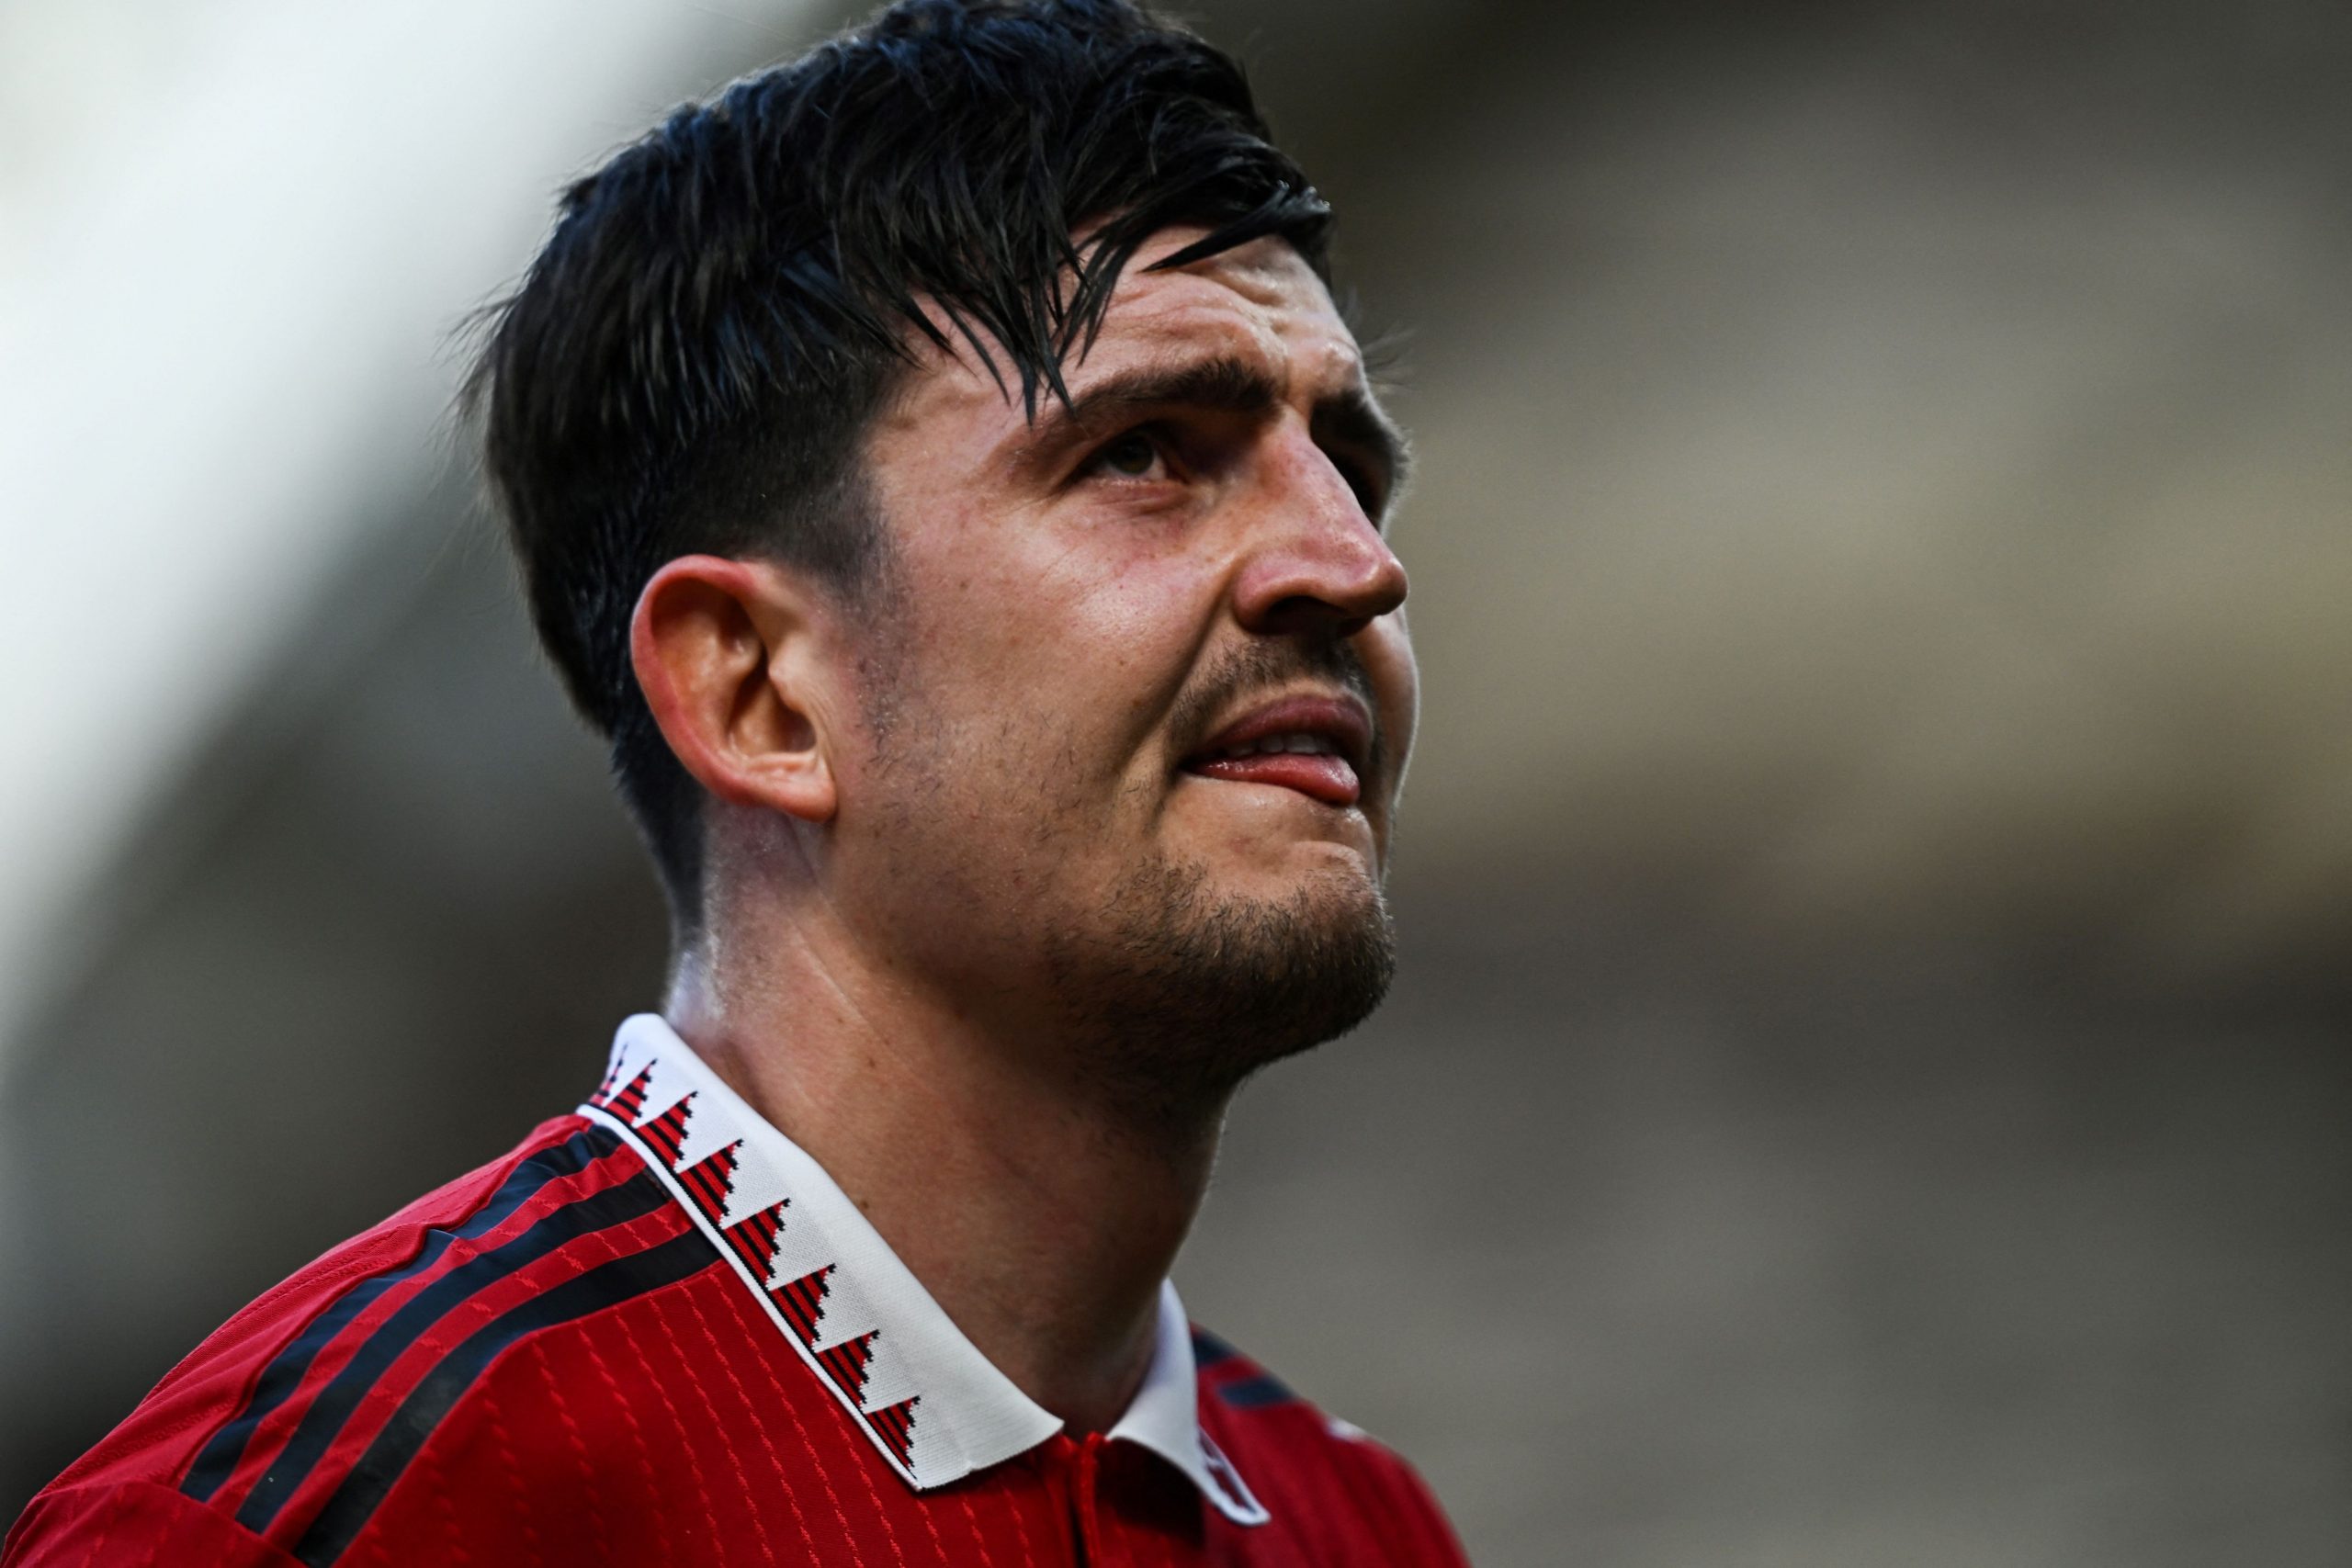 Tottenham Hotspur are set to ramp up their efforts to land Manchester United star Harry Maguire.